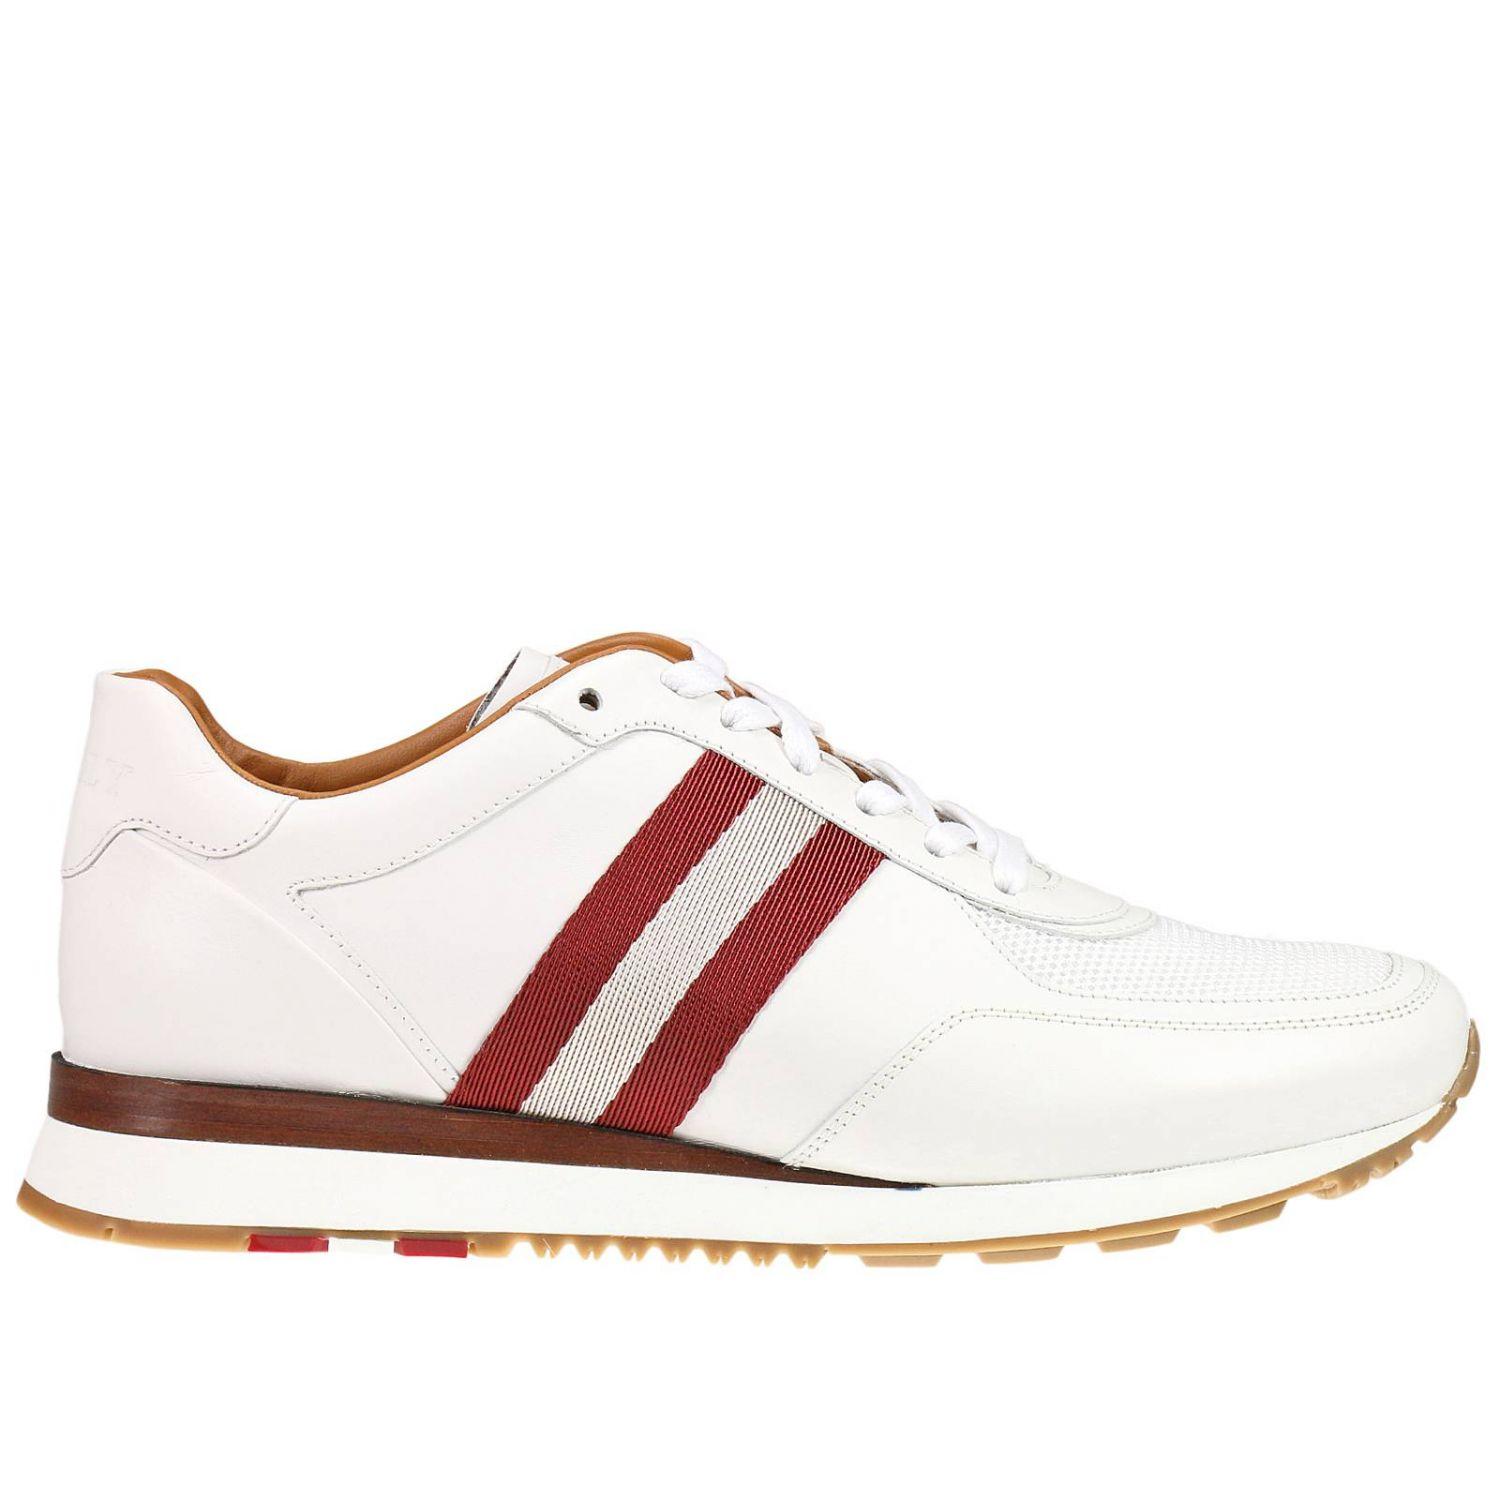 Lyst - Bally Sneakers Shoes Men in White for Men